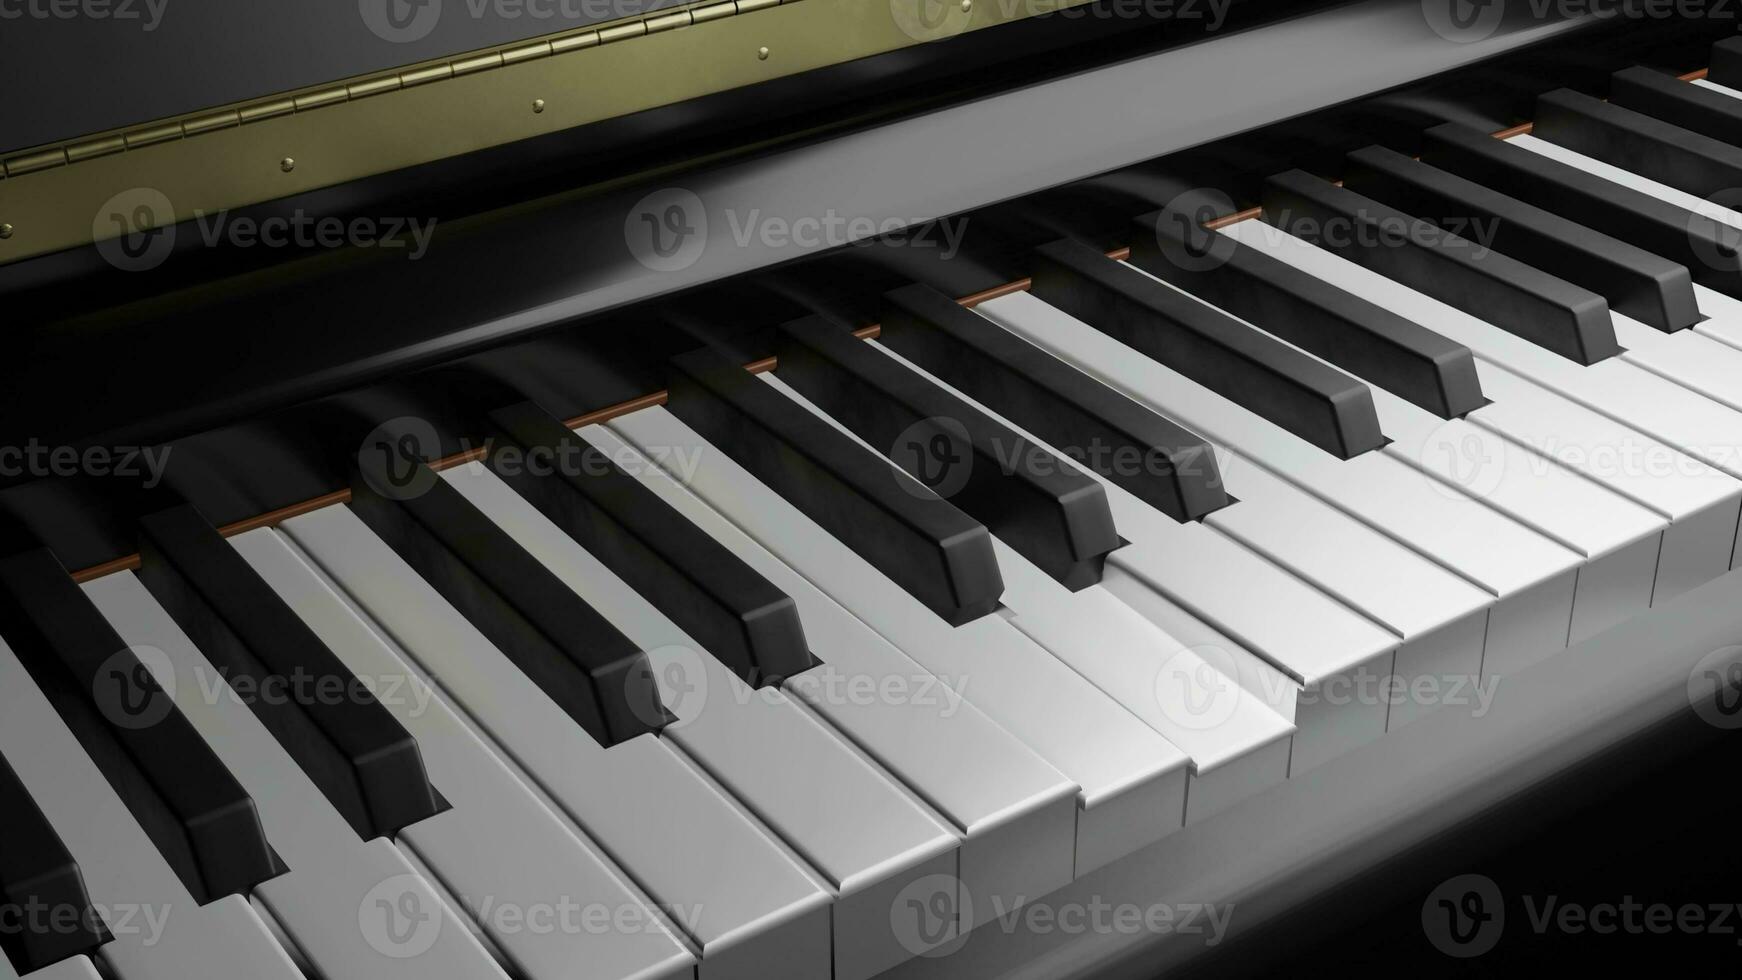 3D animation of piano playing. Design. Piano keys play themselves. Ghostly playing on keys of realistic piano. Music and instruments photo